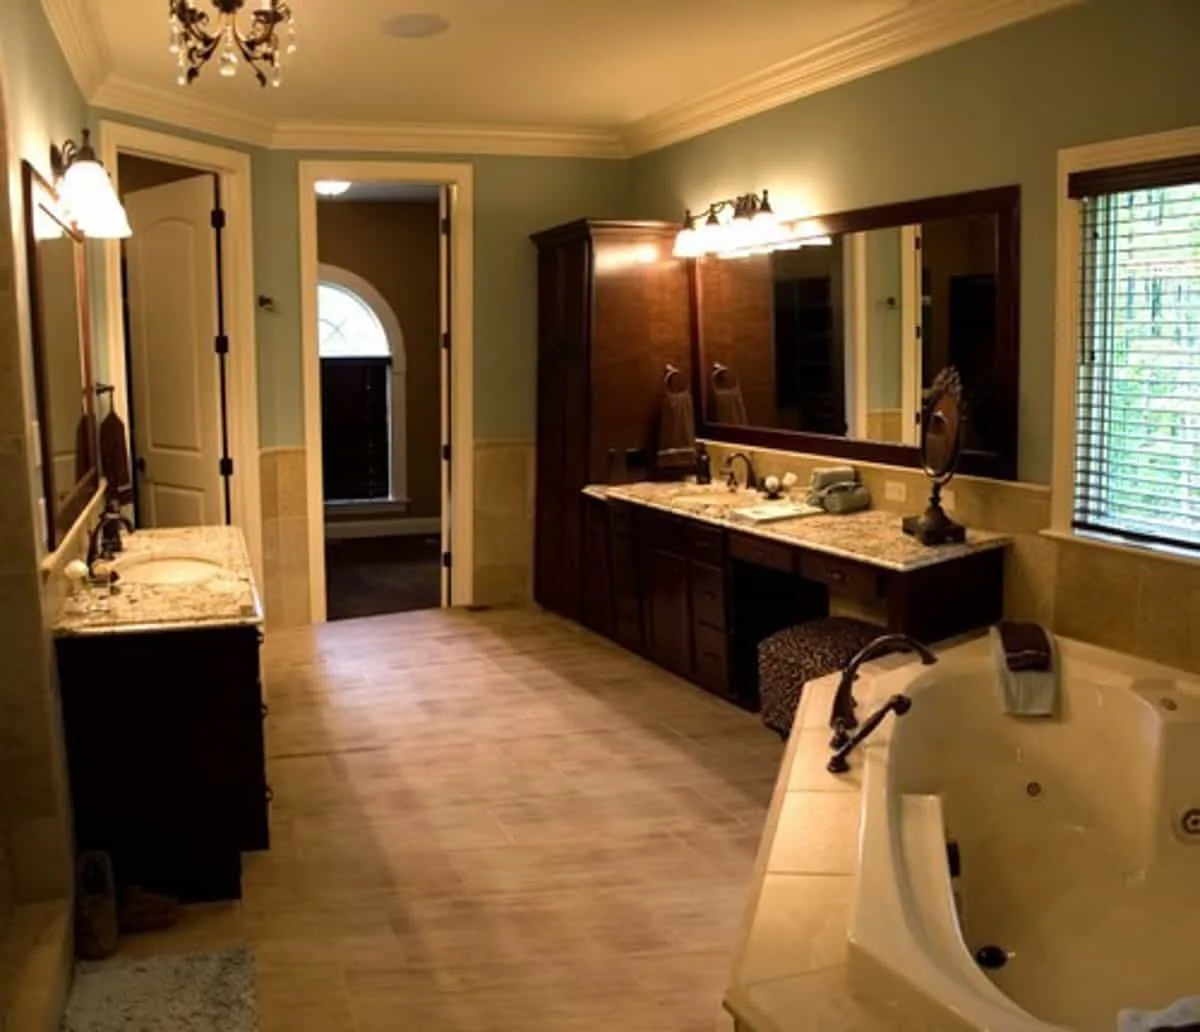 large bathroom with almond bath fixtures and dark wood cabinetry